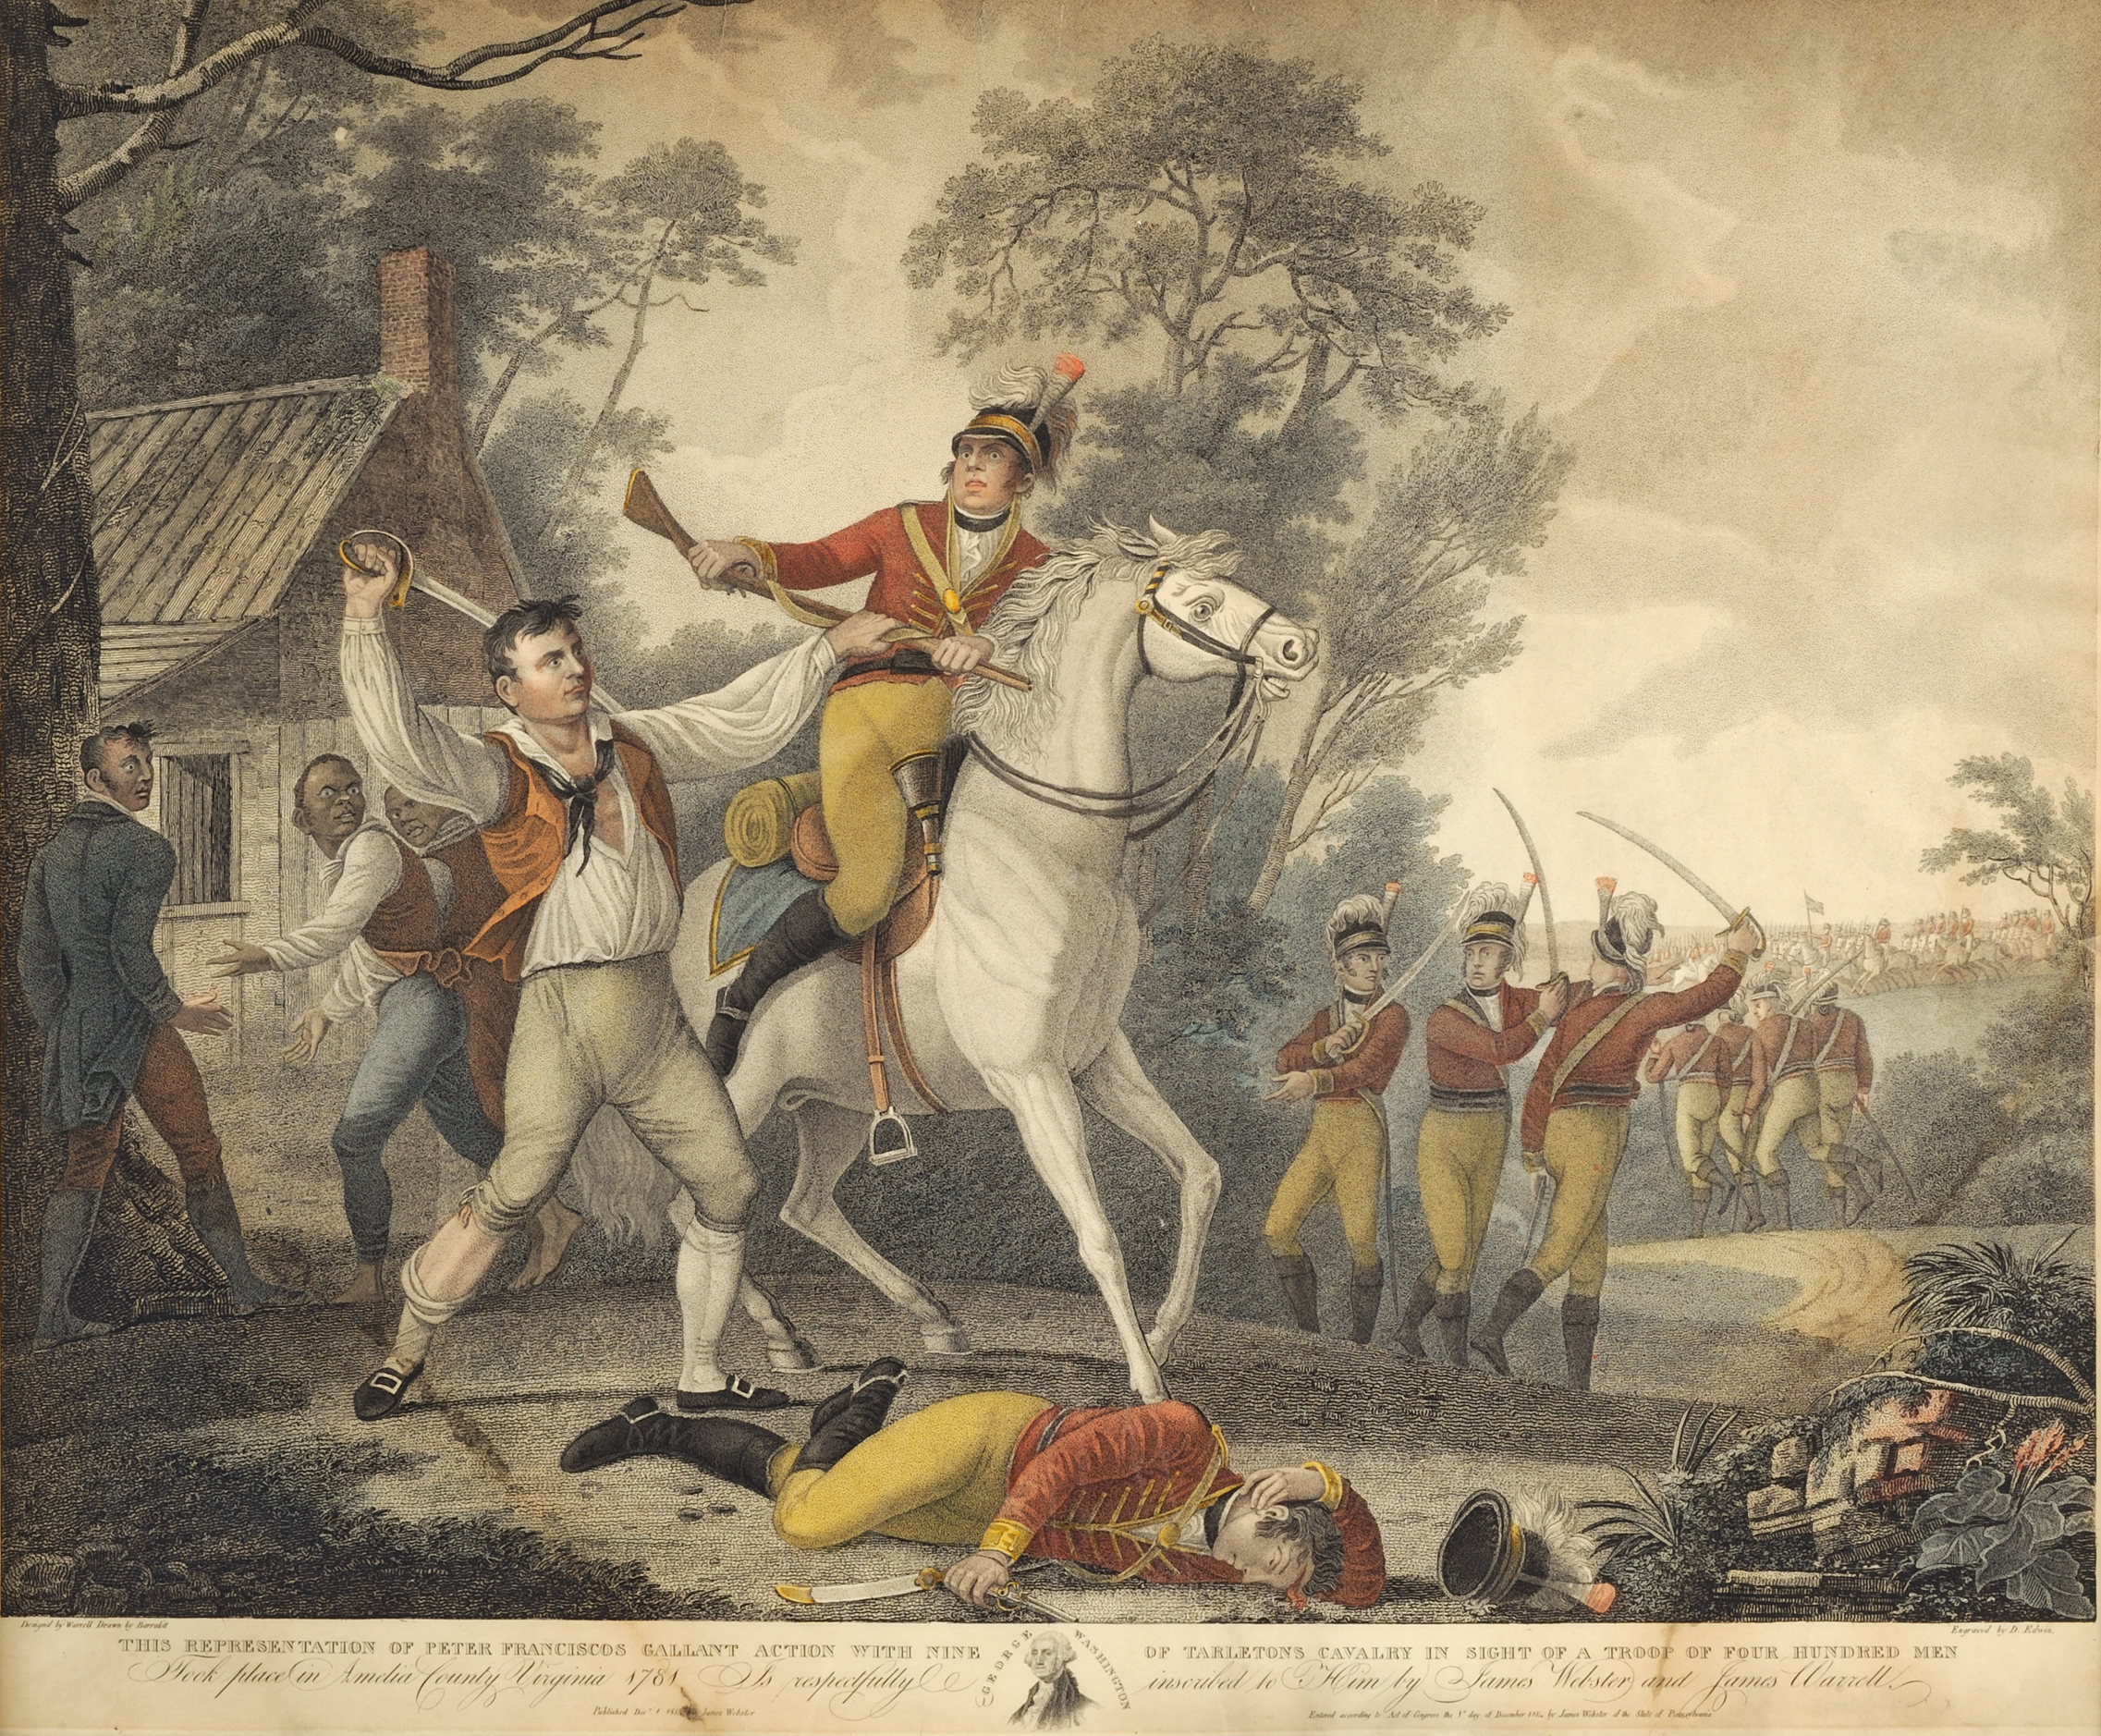 This Representation of Peter Franciscos Gallant Action with Nine of Tarleton’s Cavalry in Sight of a Troop of Four Hundred Men Took place in Amelia County, Virginia 1781, David Edwin, engraver; after John James Barralet, artist, Philadelphia, 1814